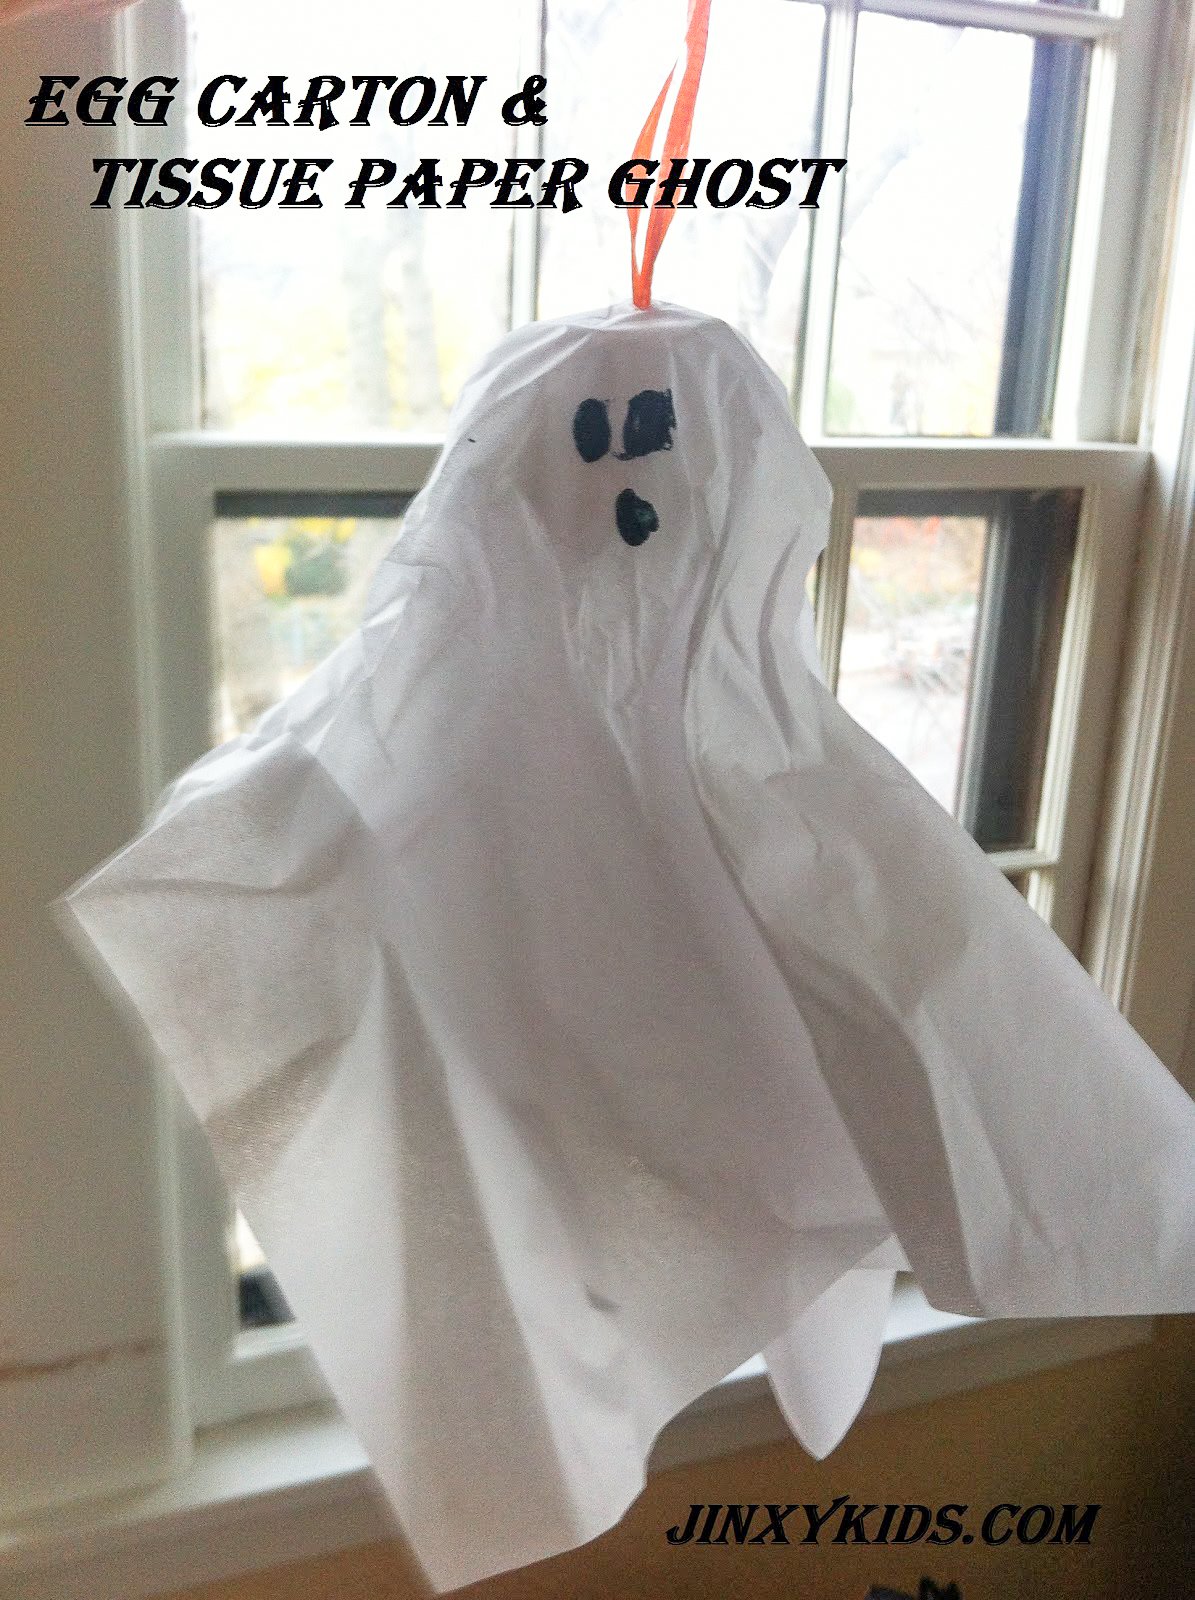 Egg Carton and Tissue Paper Ghost